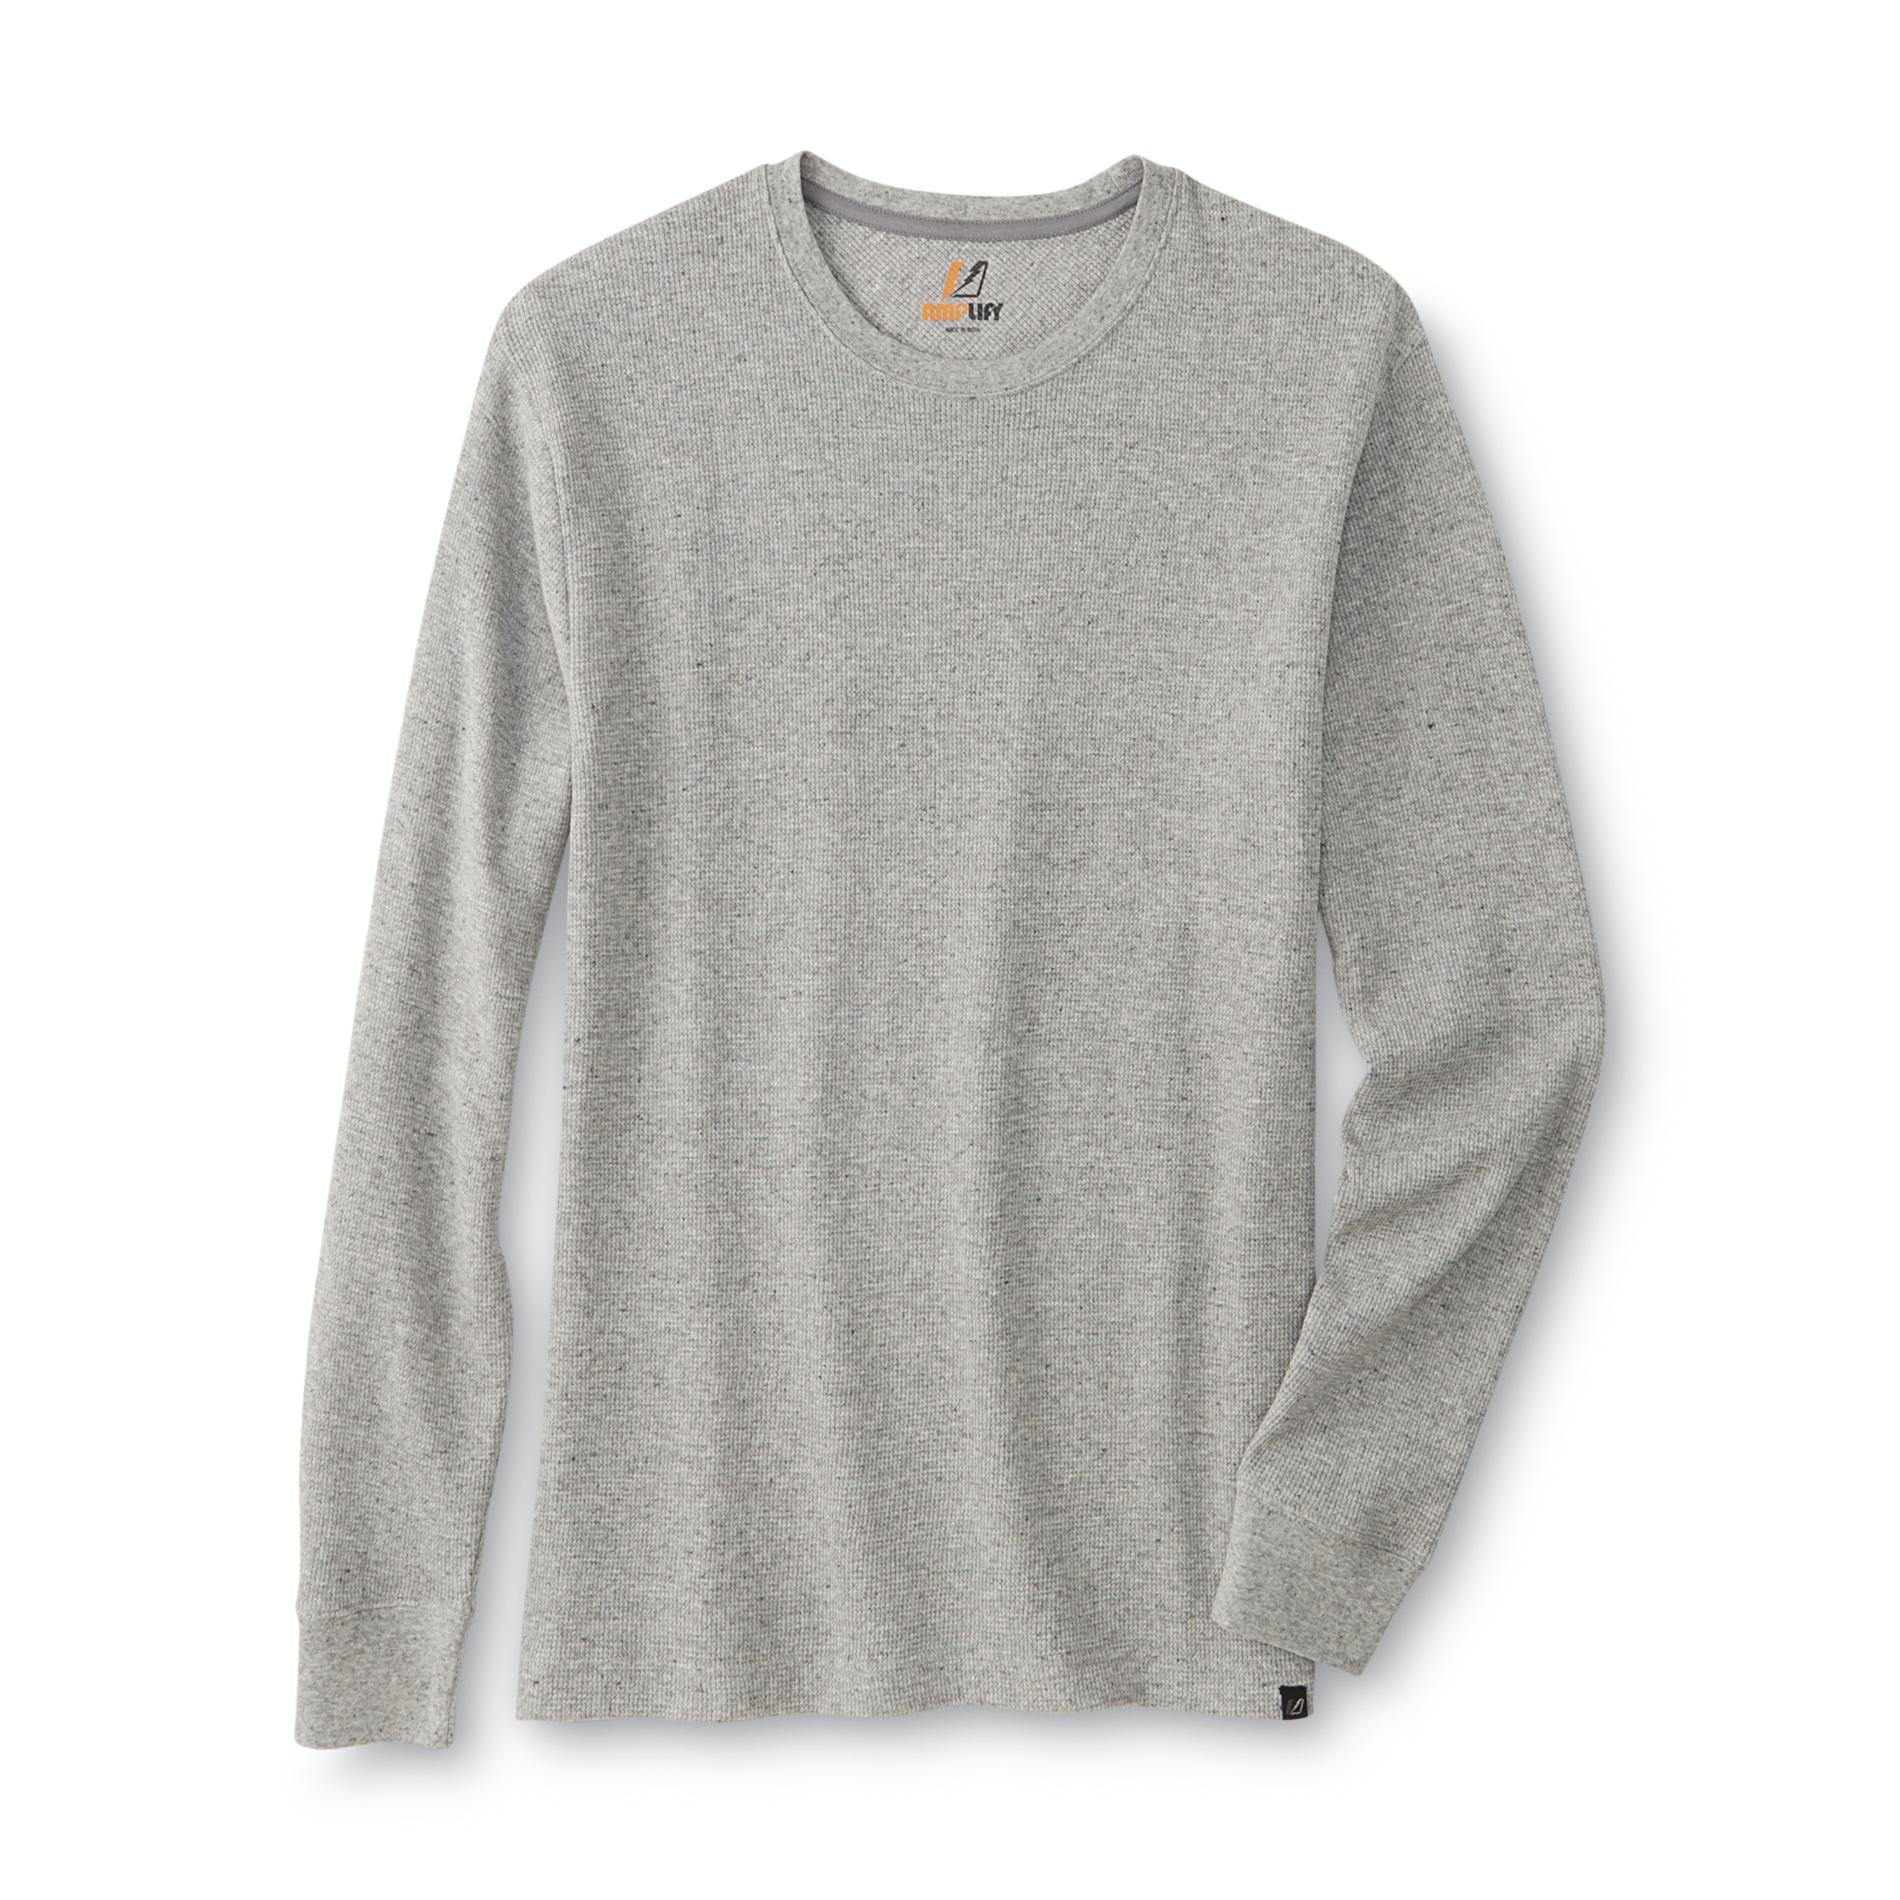 Amplify Young Men's Thermal Shirt - Speckled